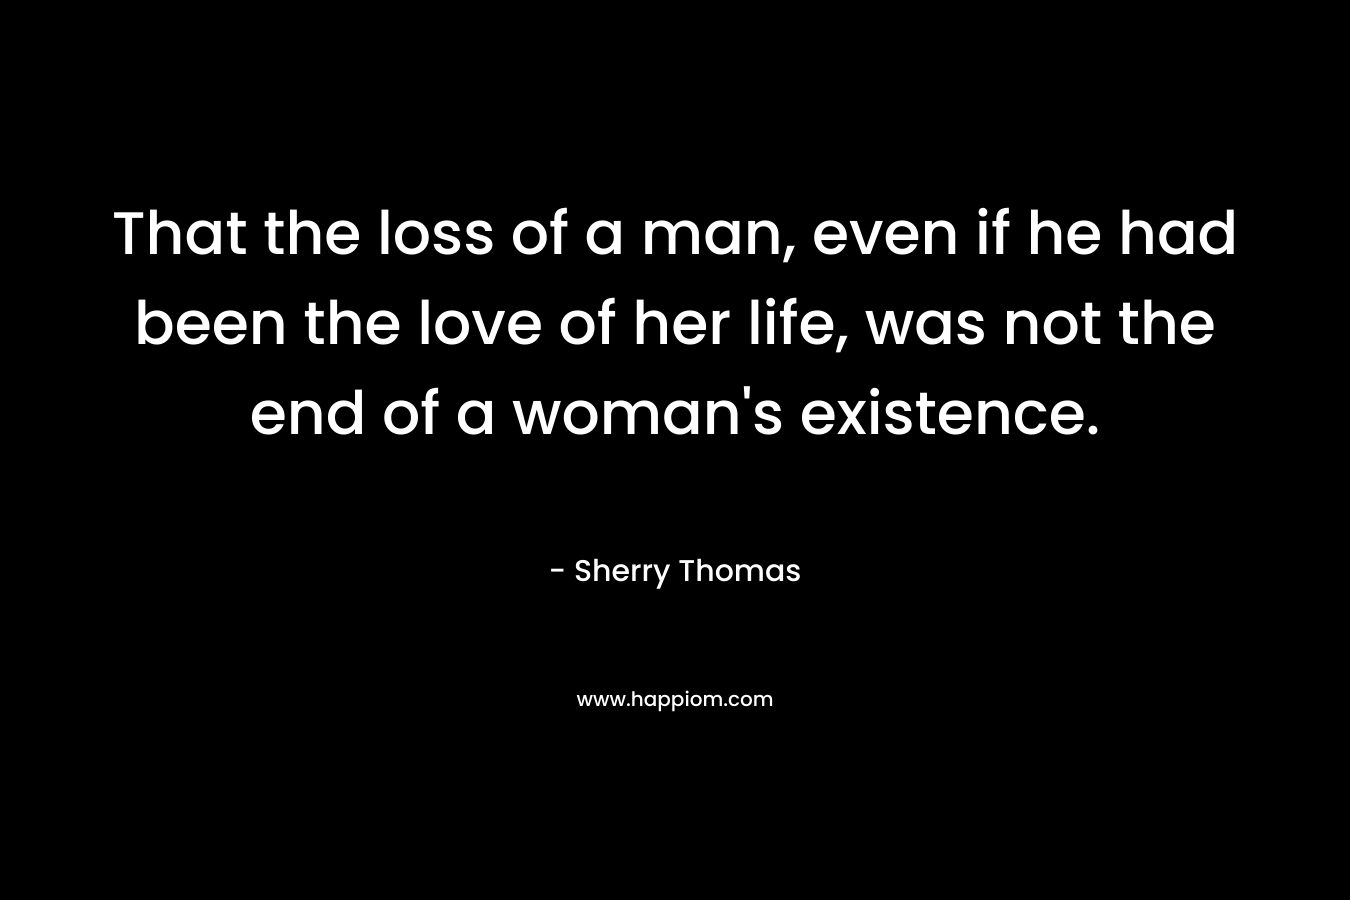 That the loss of a man, even if he had been the love of her life, was not the end of a woman's existence.